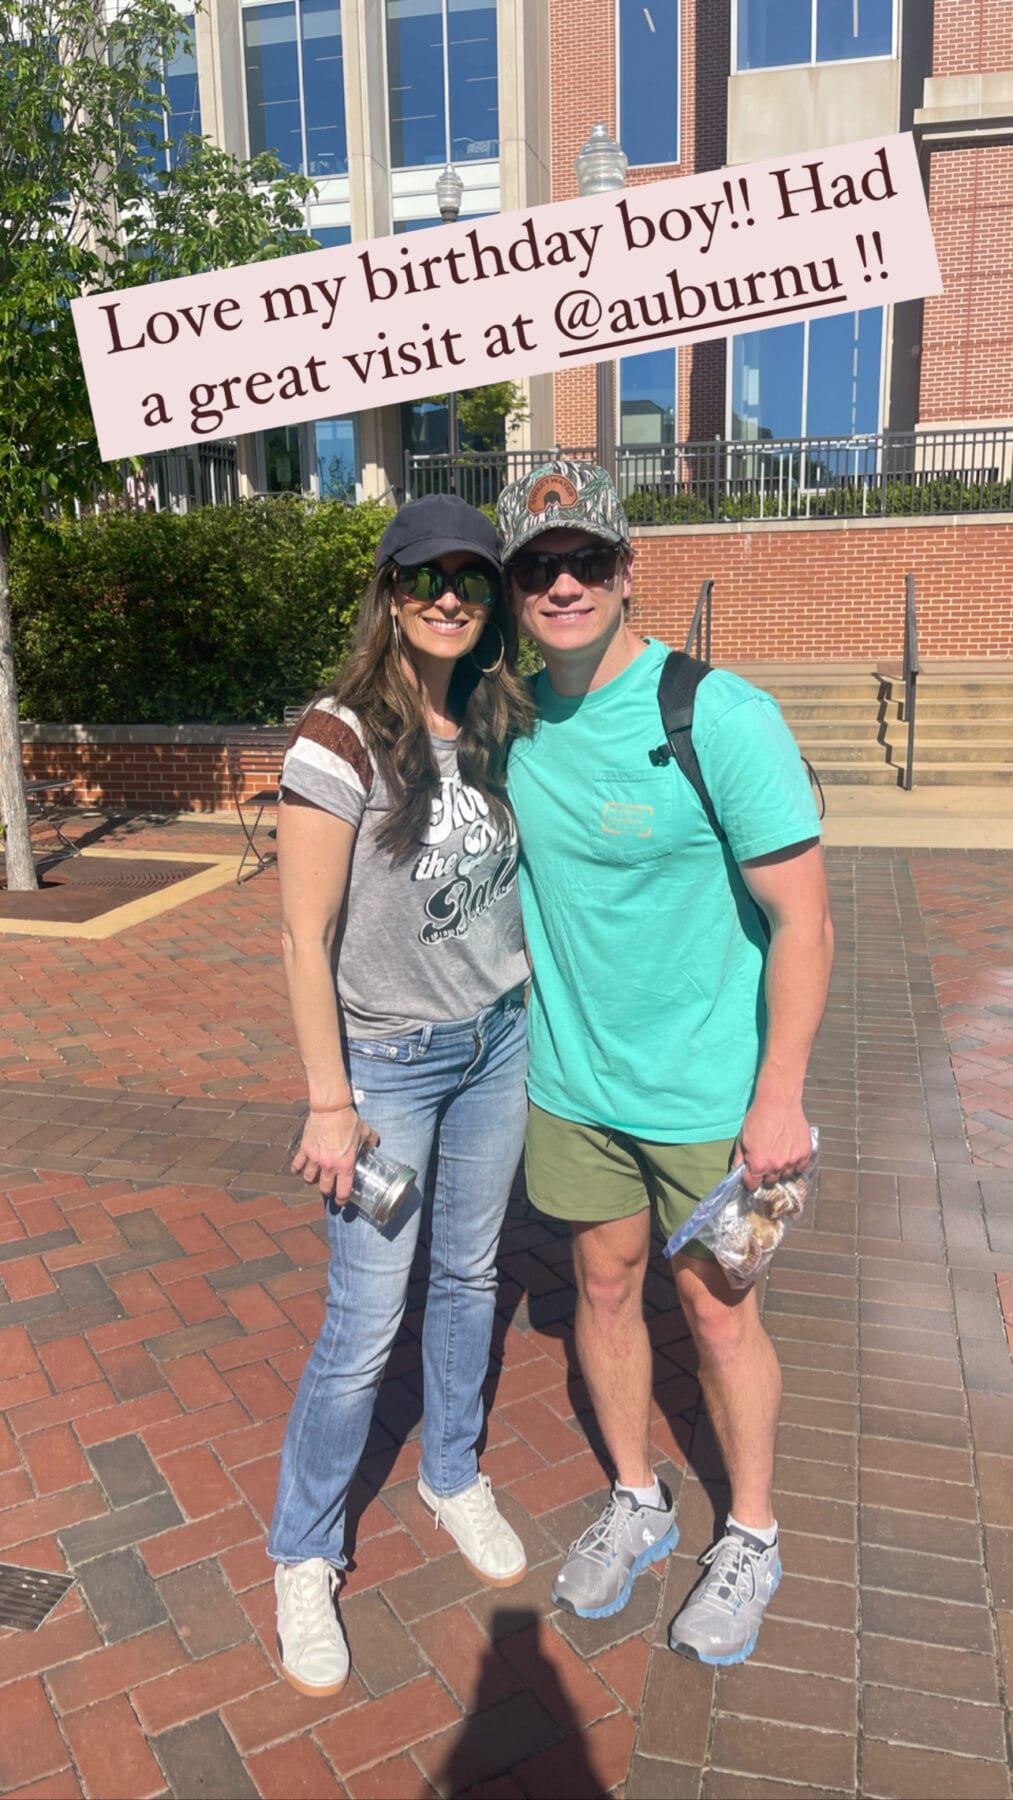 Stacy Lyn with son Howlett in front of Auburn University brick and glass building. Text: Love my birthday boy!! Had a great visit at @auburnu!!